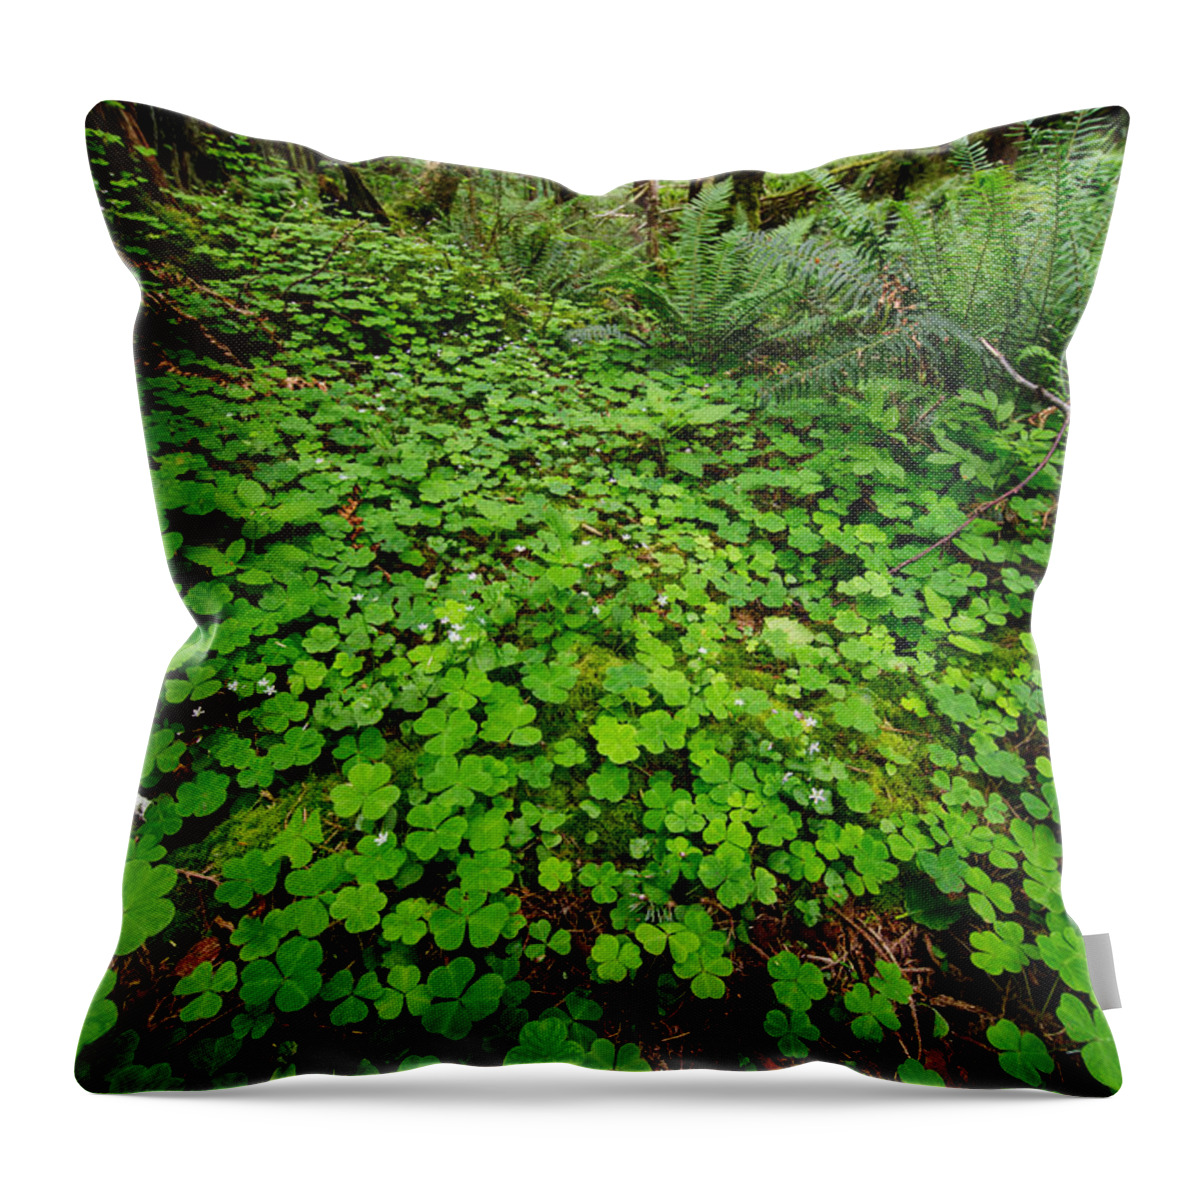 Ecola State Park Throw Pillow featuring the photograph The Forest Floor by Rick Berk